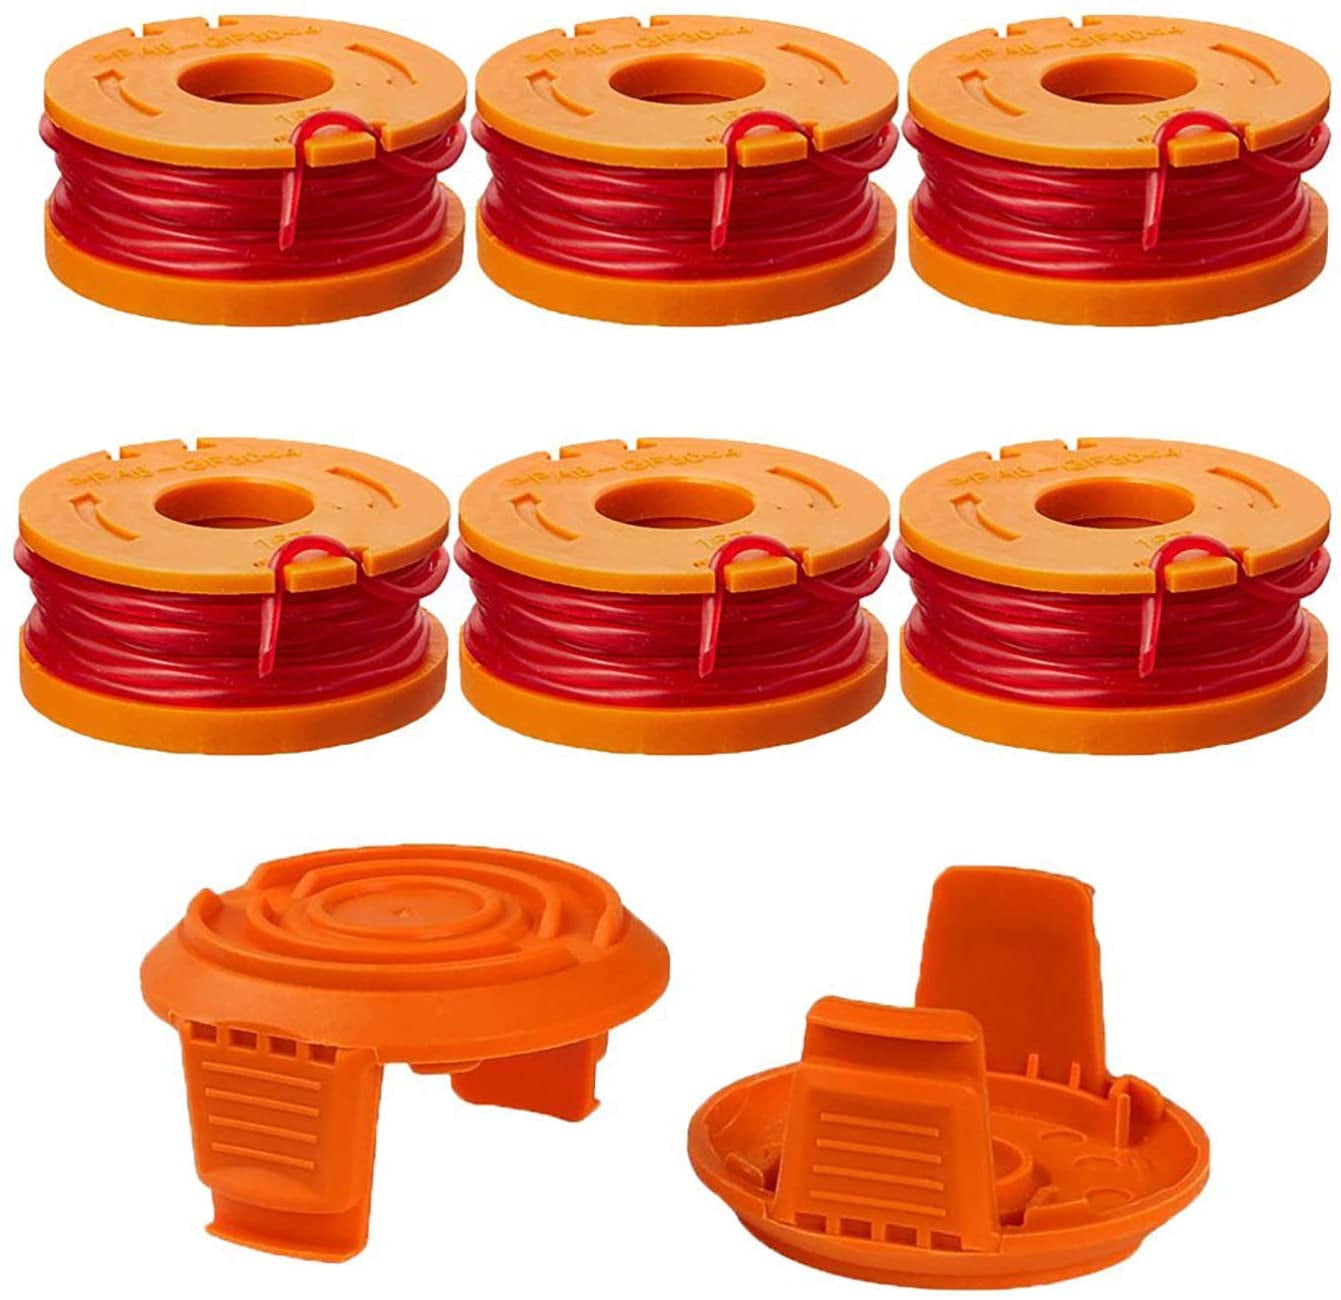 4 Pack Thten GT Trimmer Replacement Spool Cap Covers,WA6531 Trimmer Cap Compatible with Worx WG155 WG180 String Trimmers,50006531 Trimmer Line Cover,Weed Eater Spool Cap for Worx Parts 